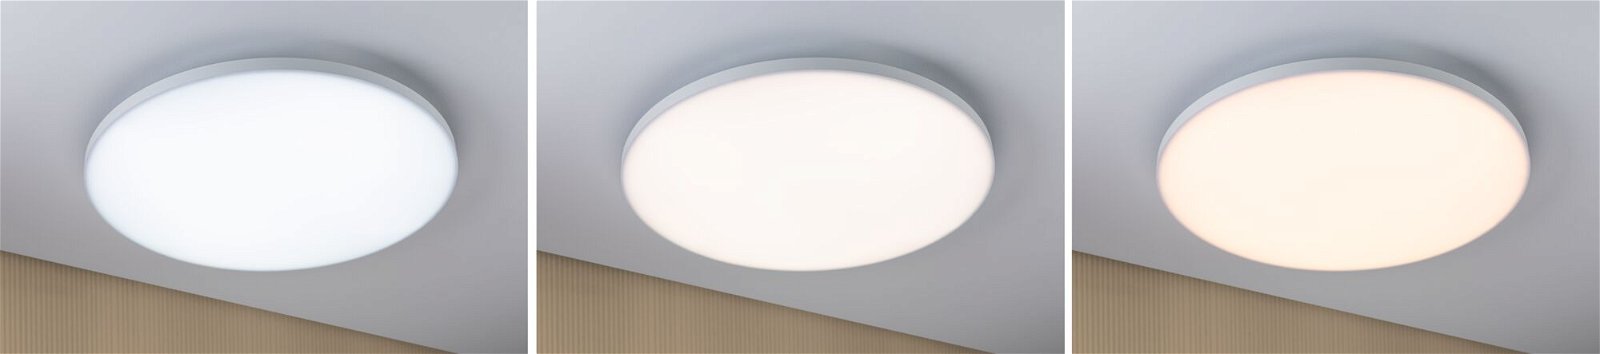 LED Panel Smart Home Zigbee Velora round 600mm 32W 3000lm Tunable White White dimmable